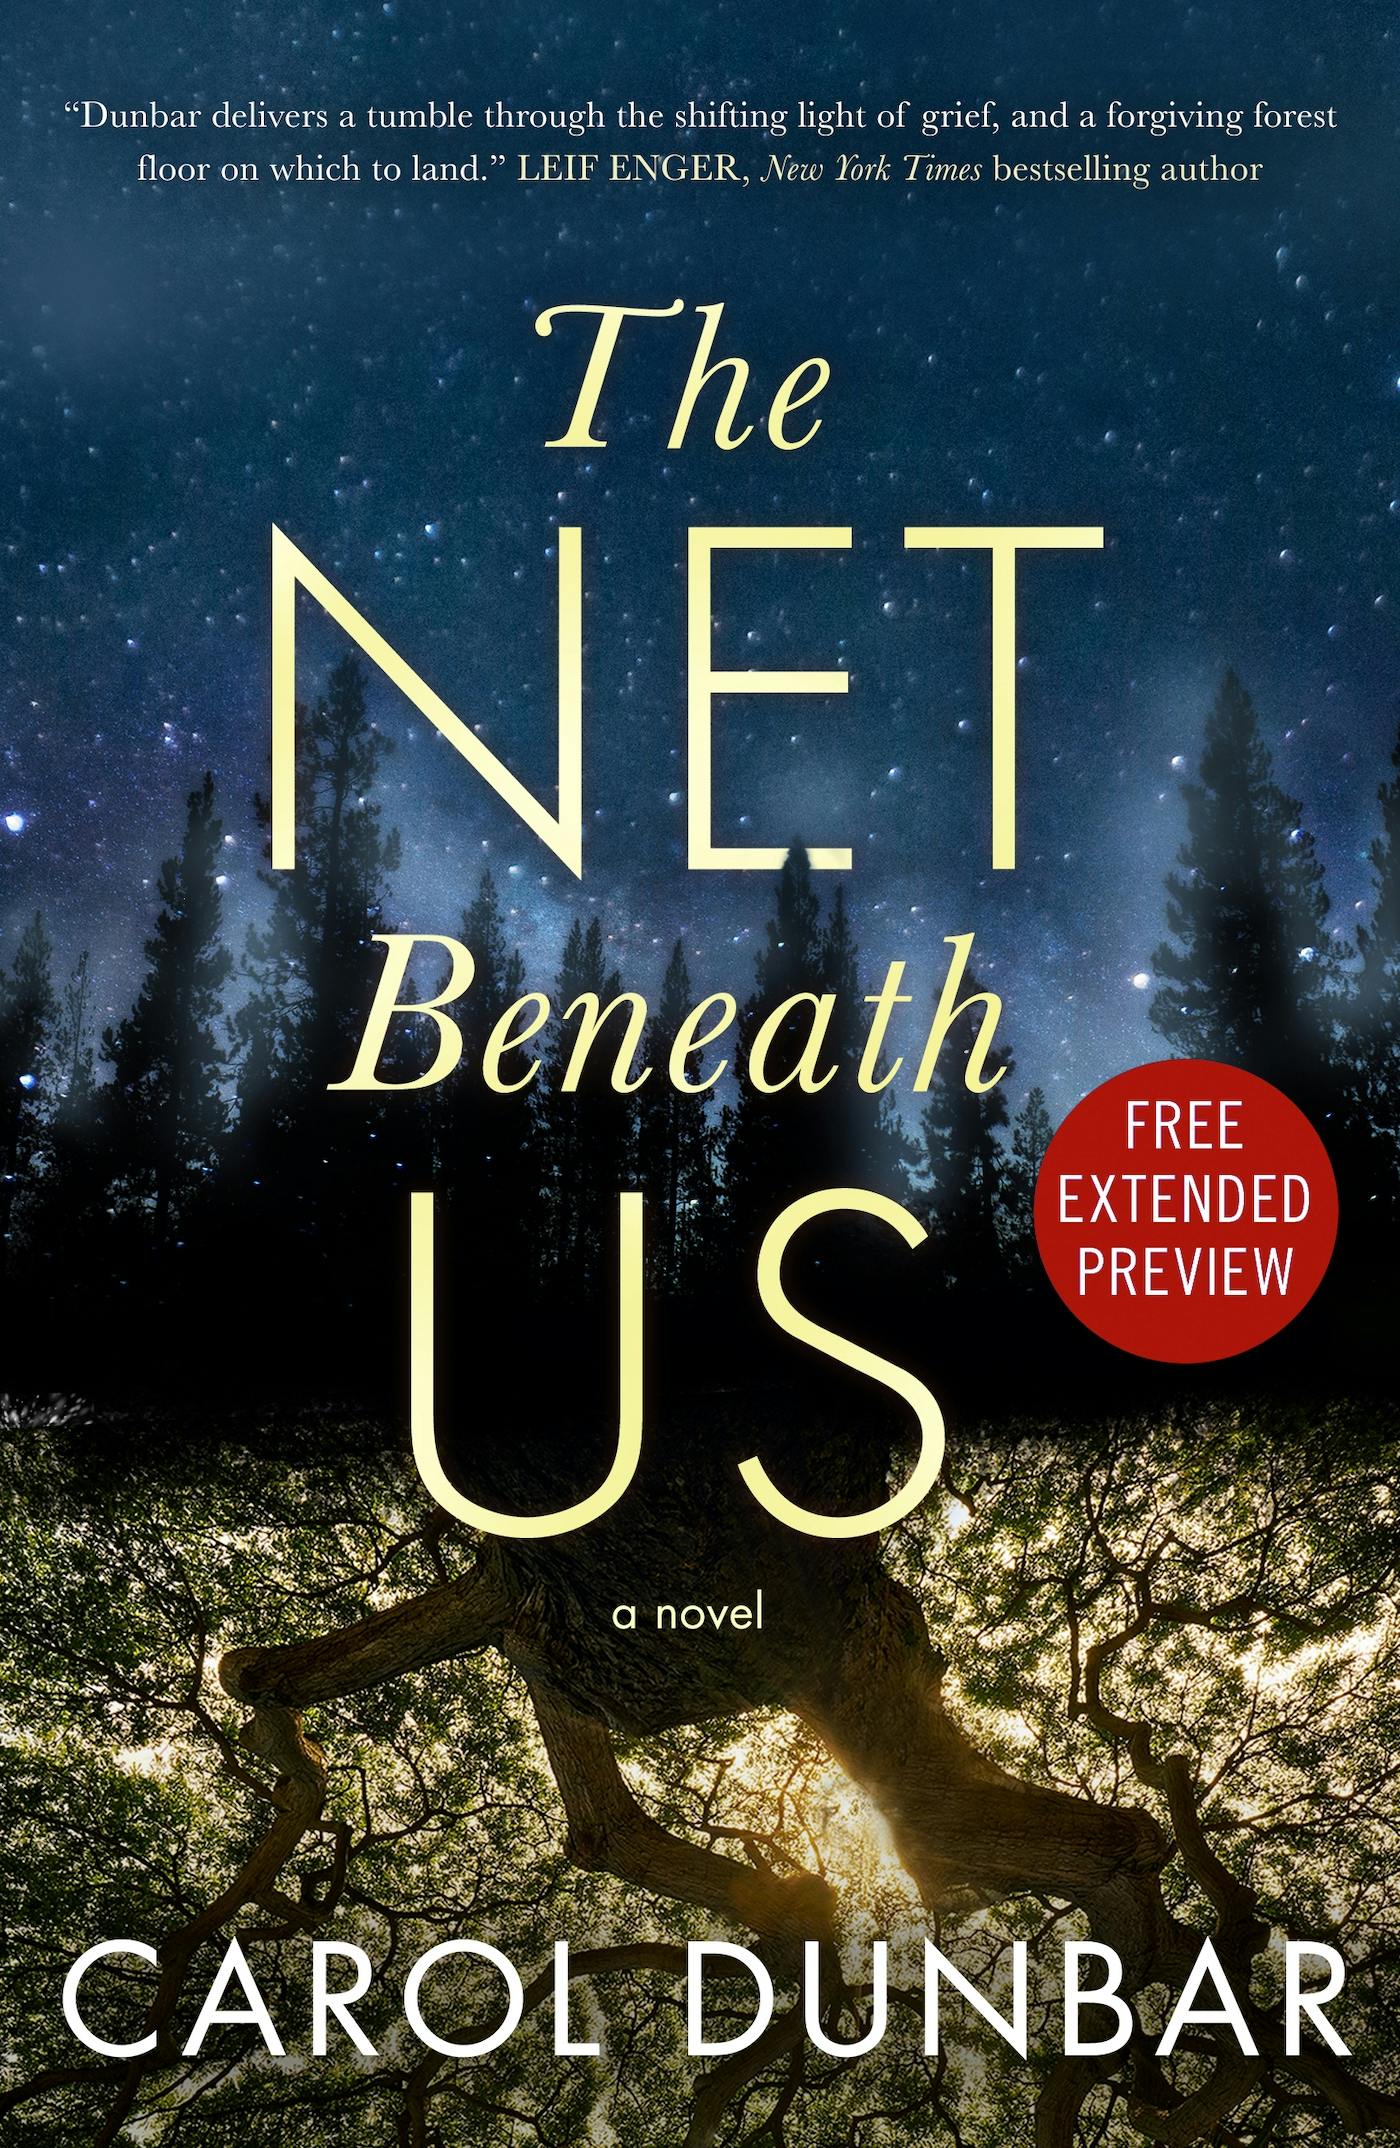 Cover for the book titled as: The Net Beneath Us Sneak Peek